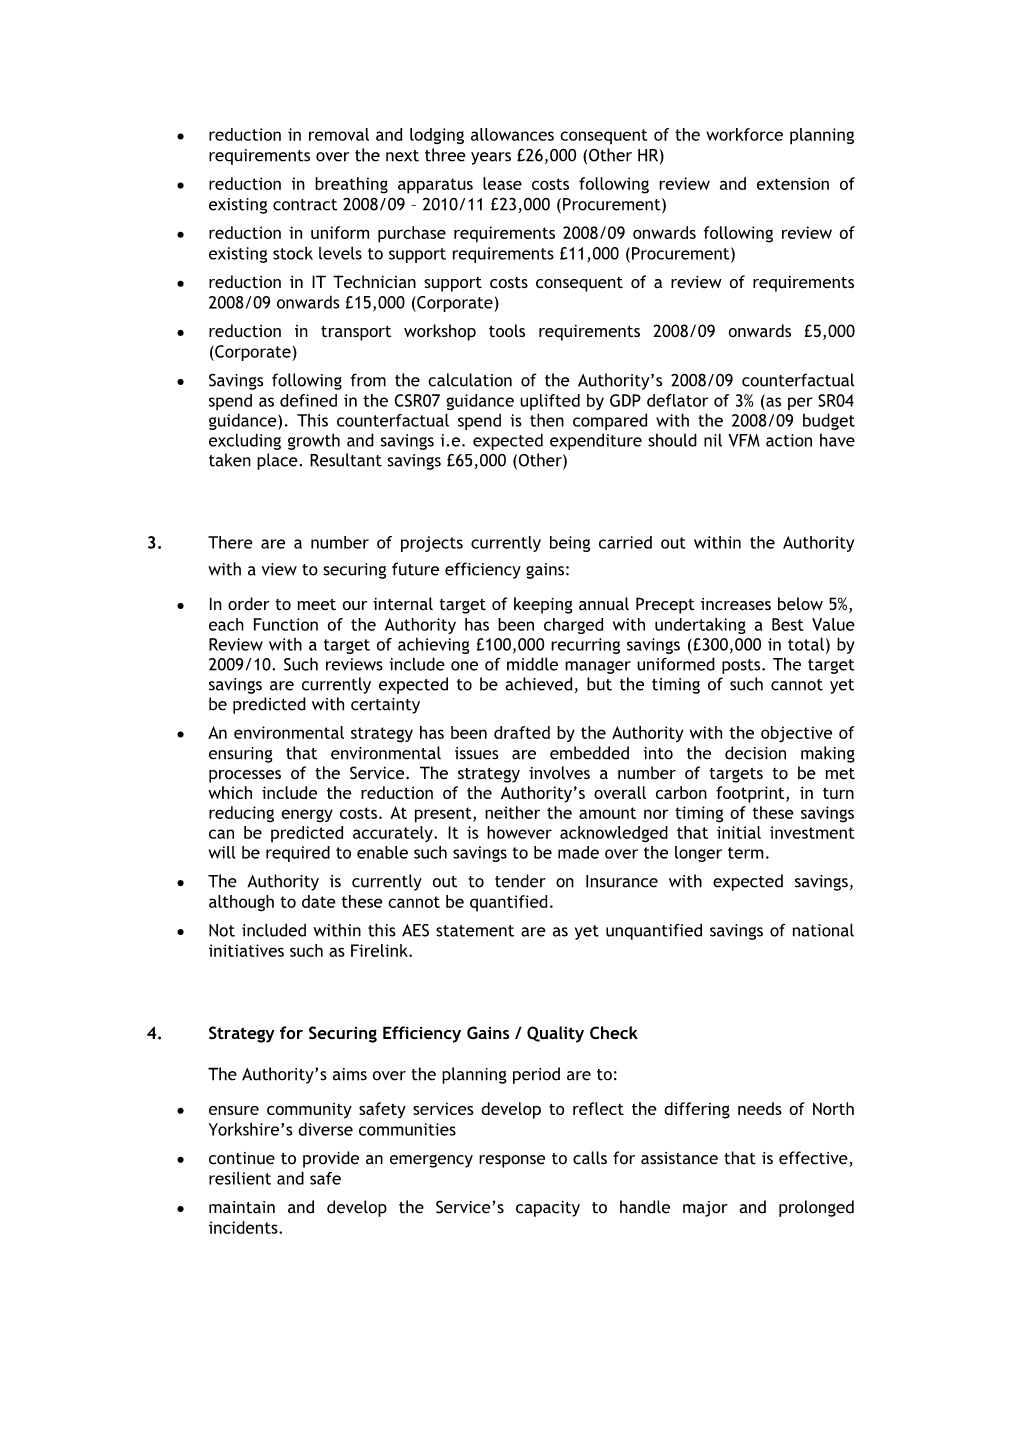 North Yorkshire Fire & Rescue Forward Look Efficiency Statement 2008/09 - Commentary